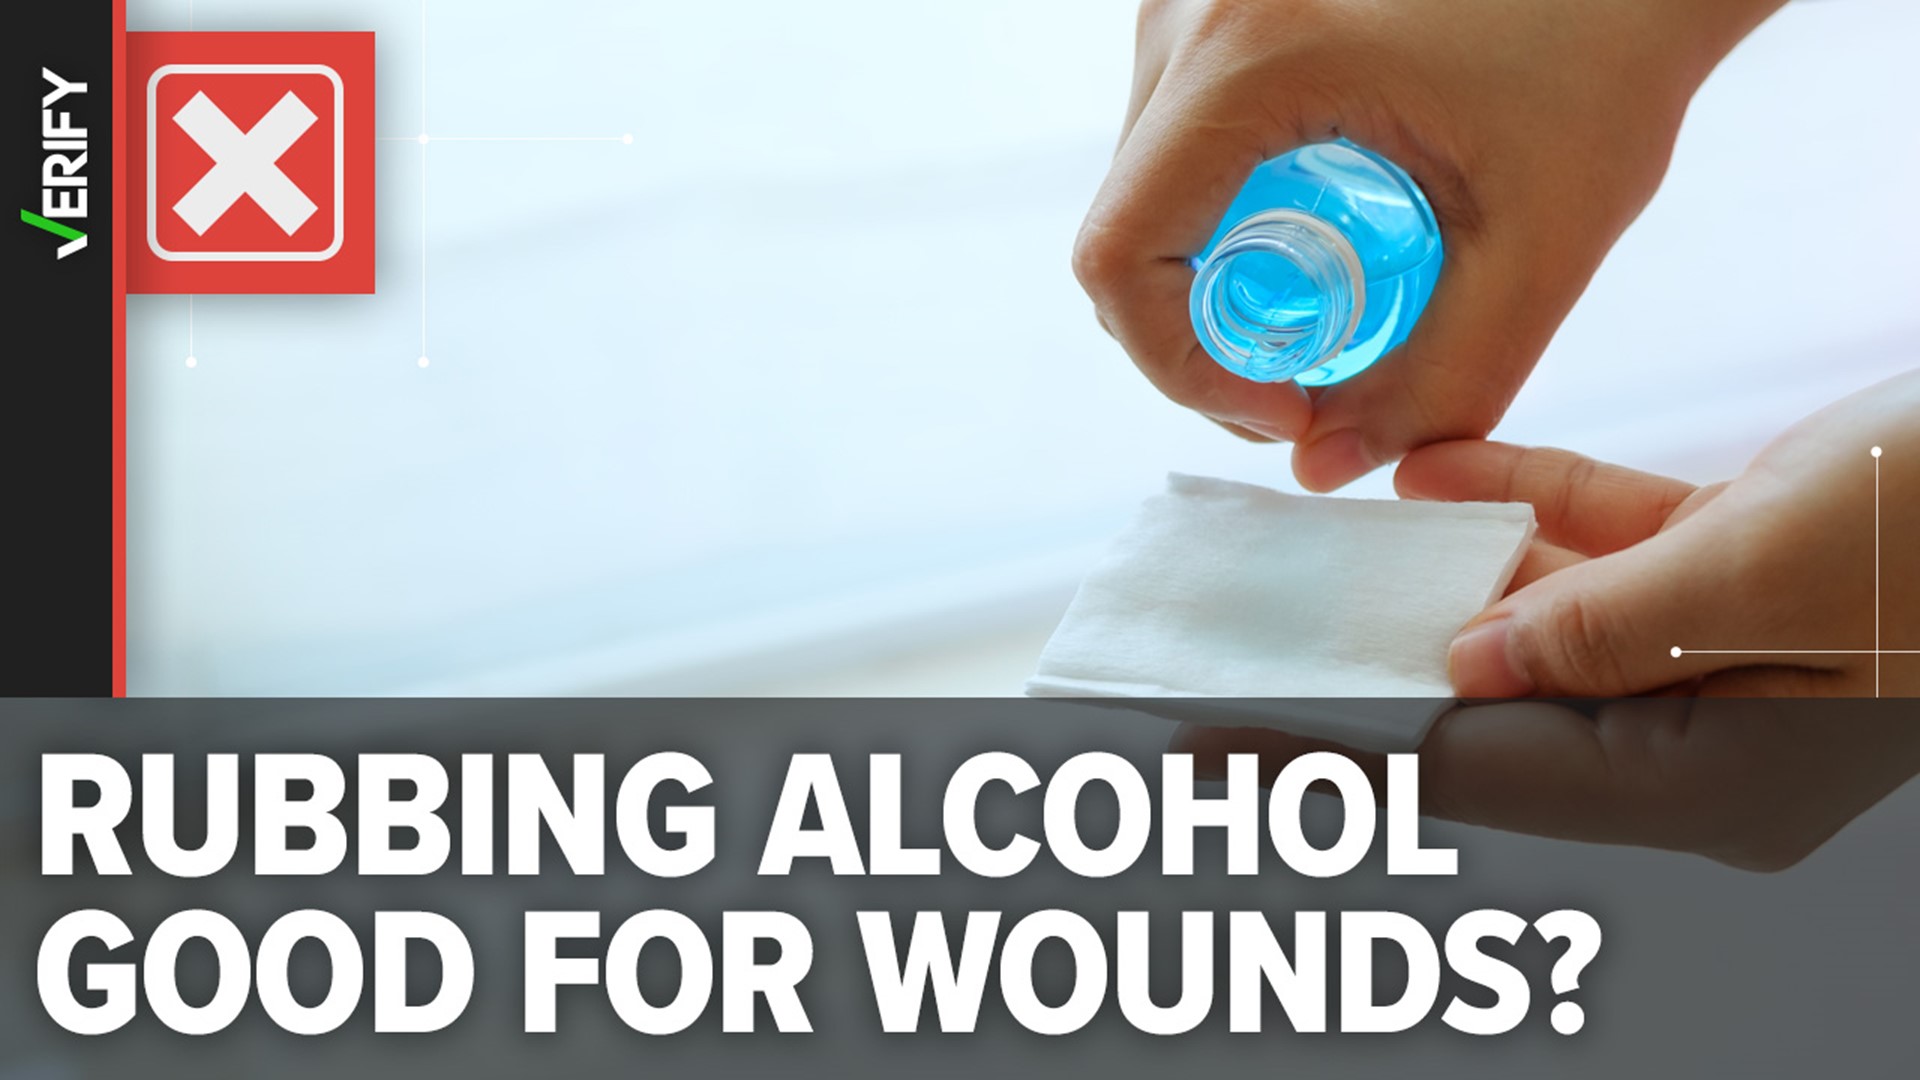 Rubbing alcohol can break down healthy skin cells, slowing down the healing process.